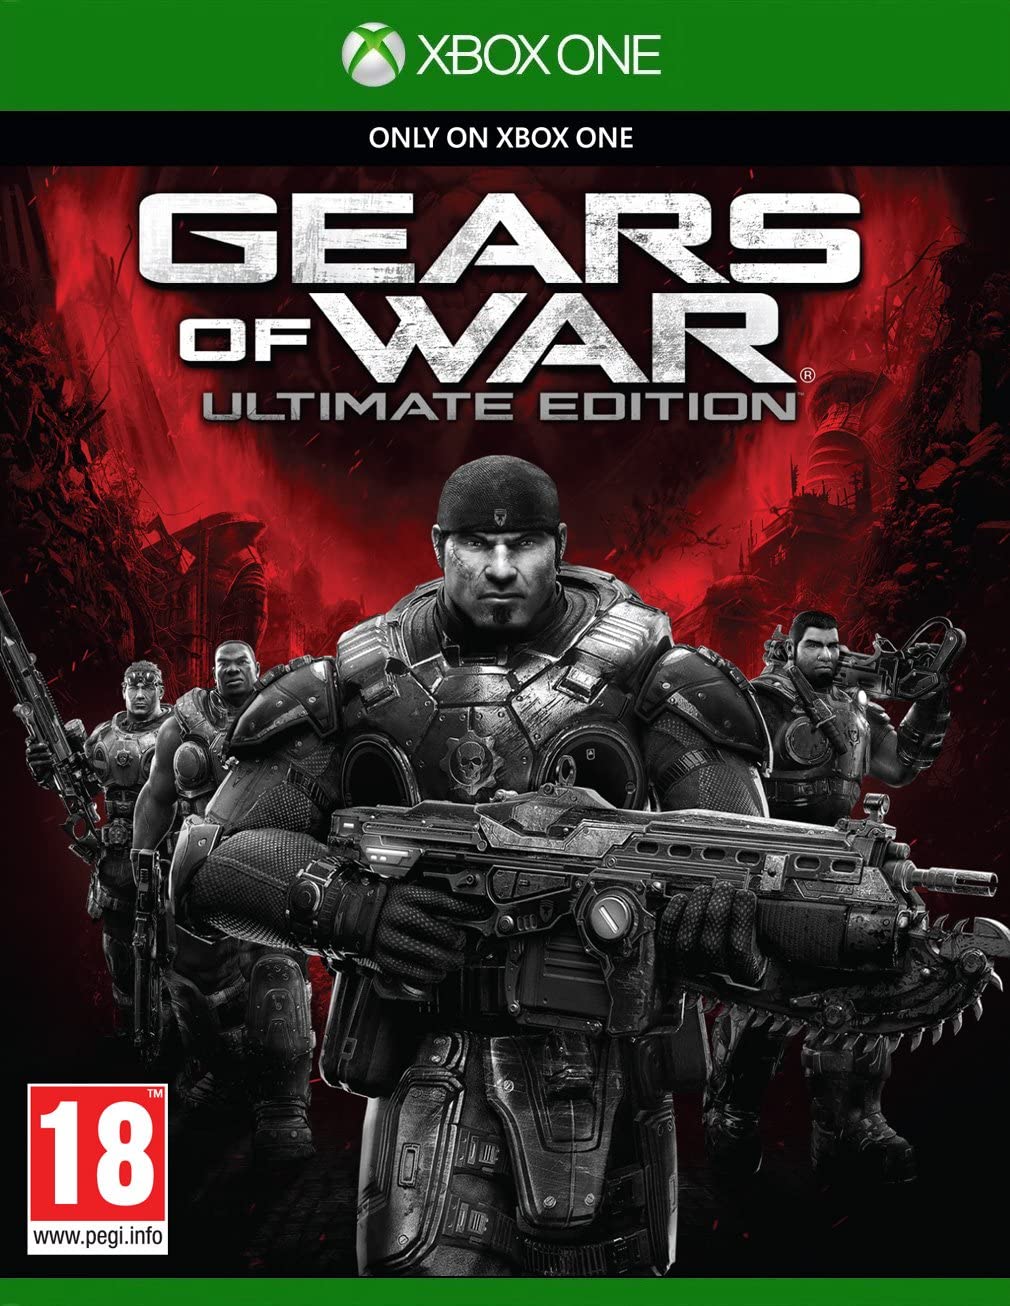 Gears of War Ultimate Edition - Xbox One | Yard's Games Ltd